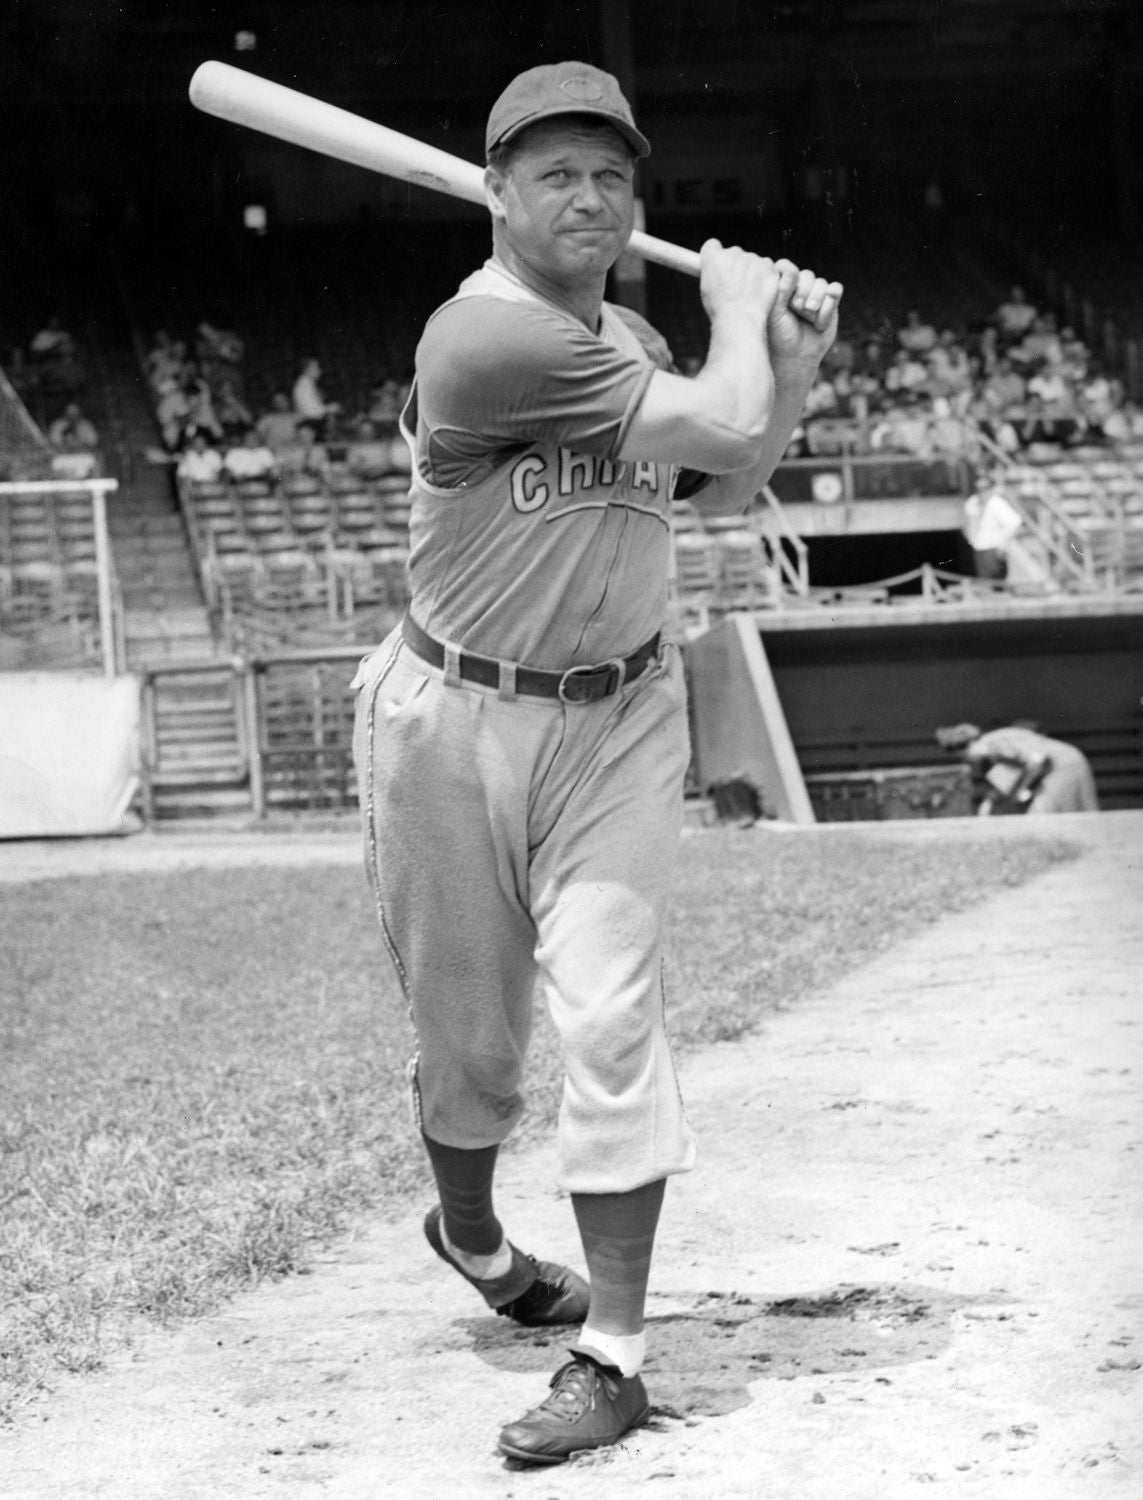 Jimmie Foxx pitched in for Phillies 